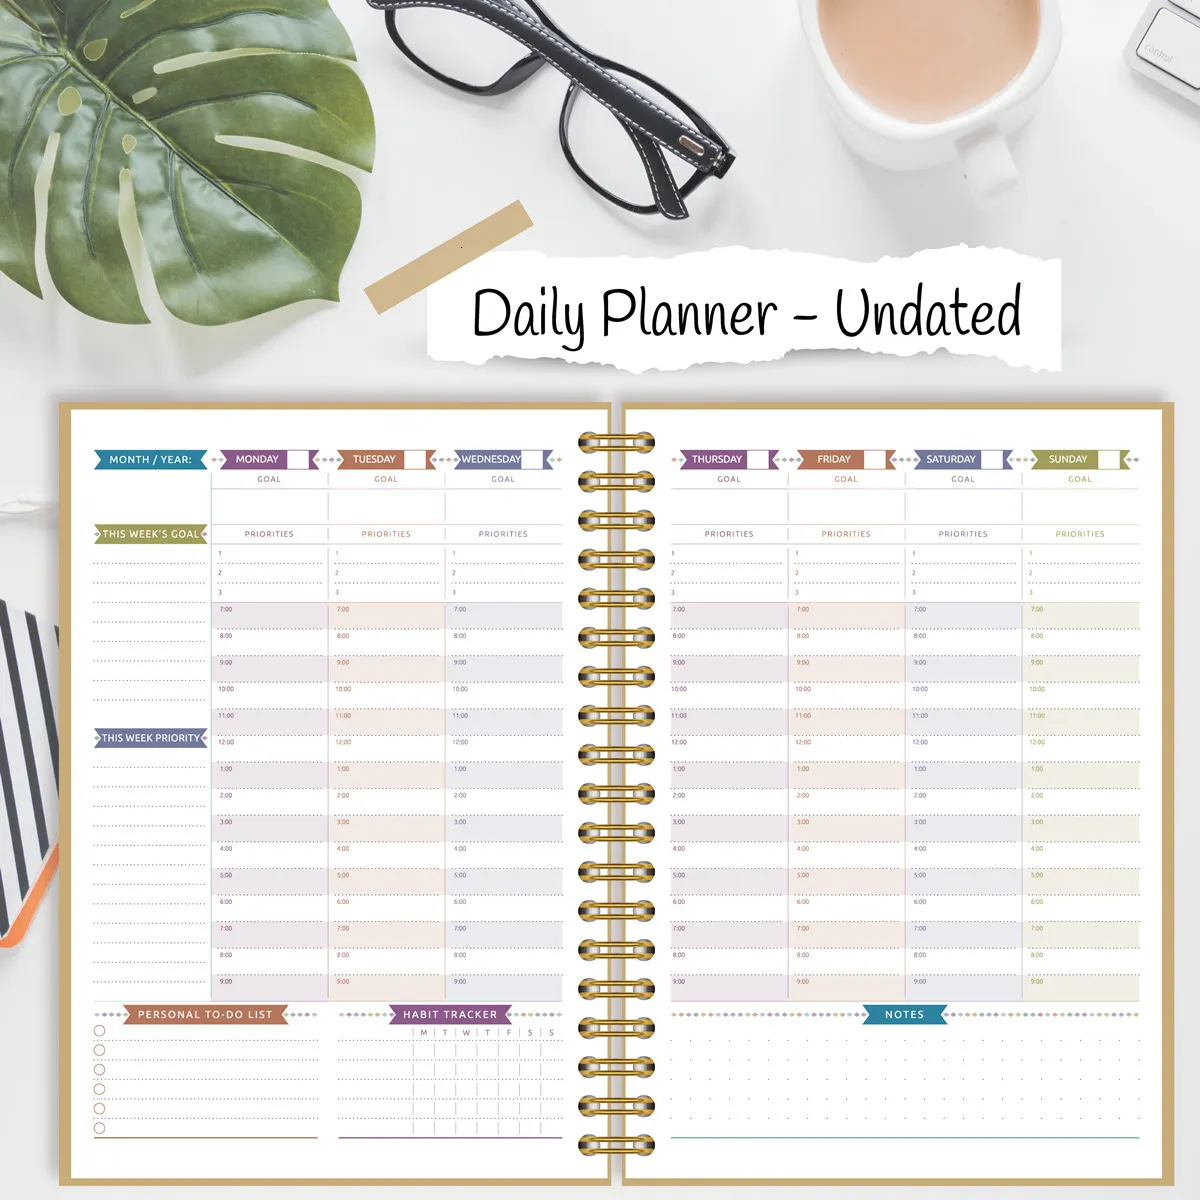 Blocs-notes 2023 Goal Action Planner Deluxe Undated Daily Weekly And Monthly Scheduling Agenda Notebook 83 x 58" 230130